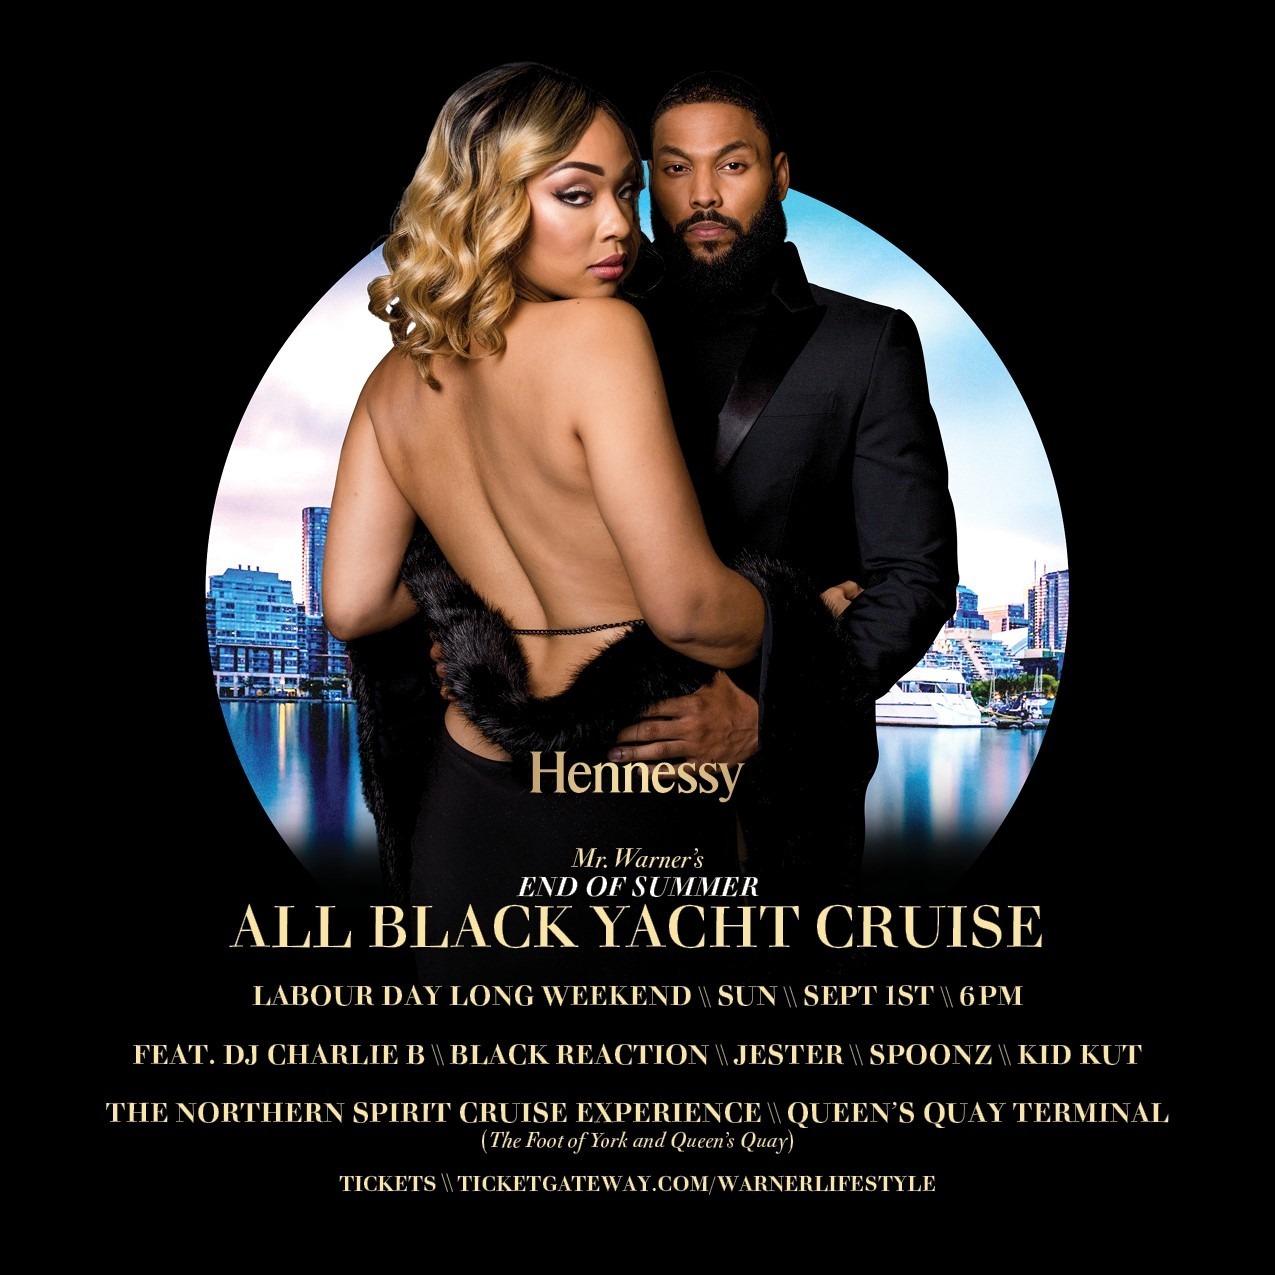 Mr. Warner's End of Summer - All Black Yacht Cruise